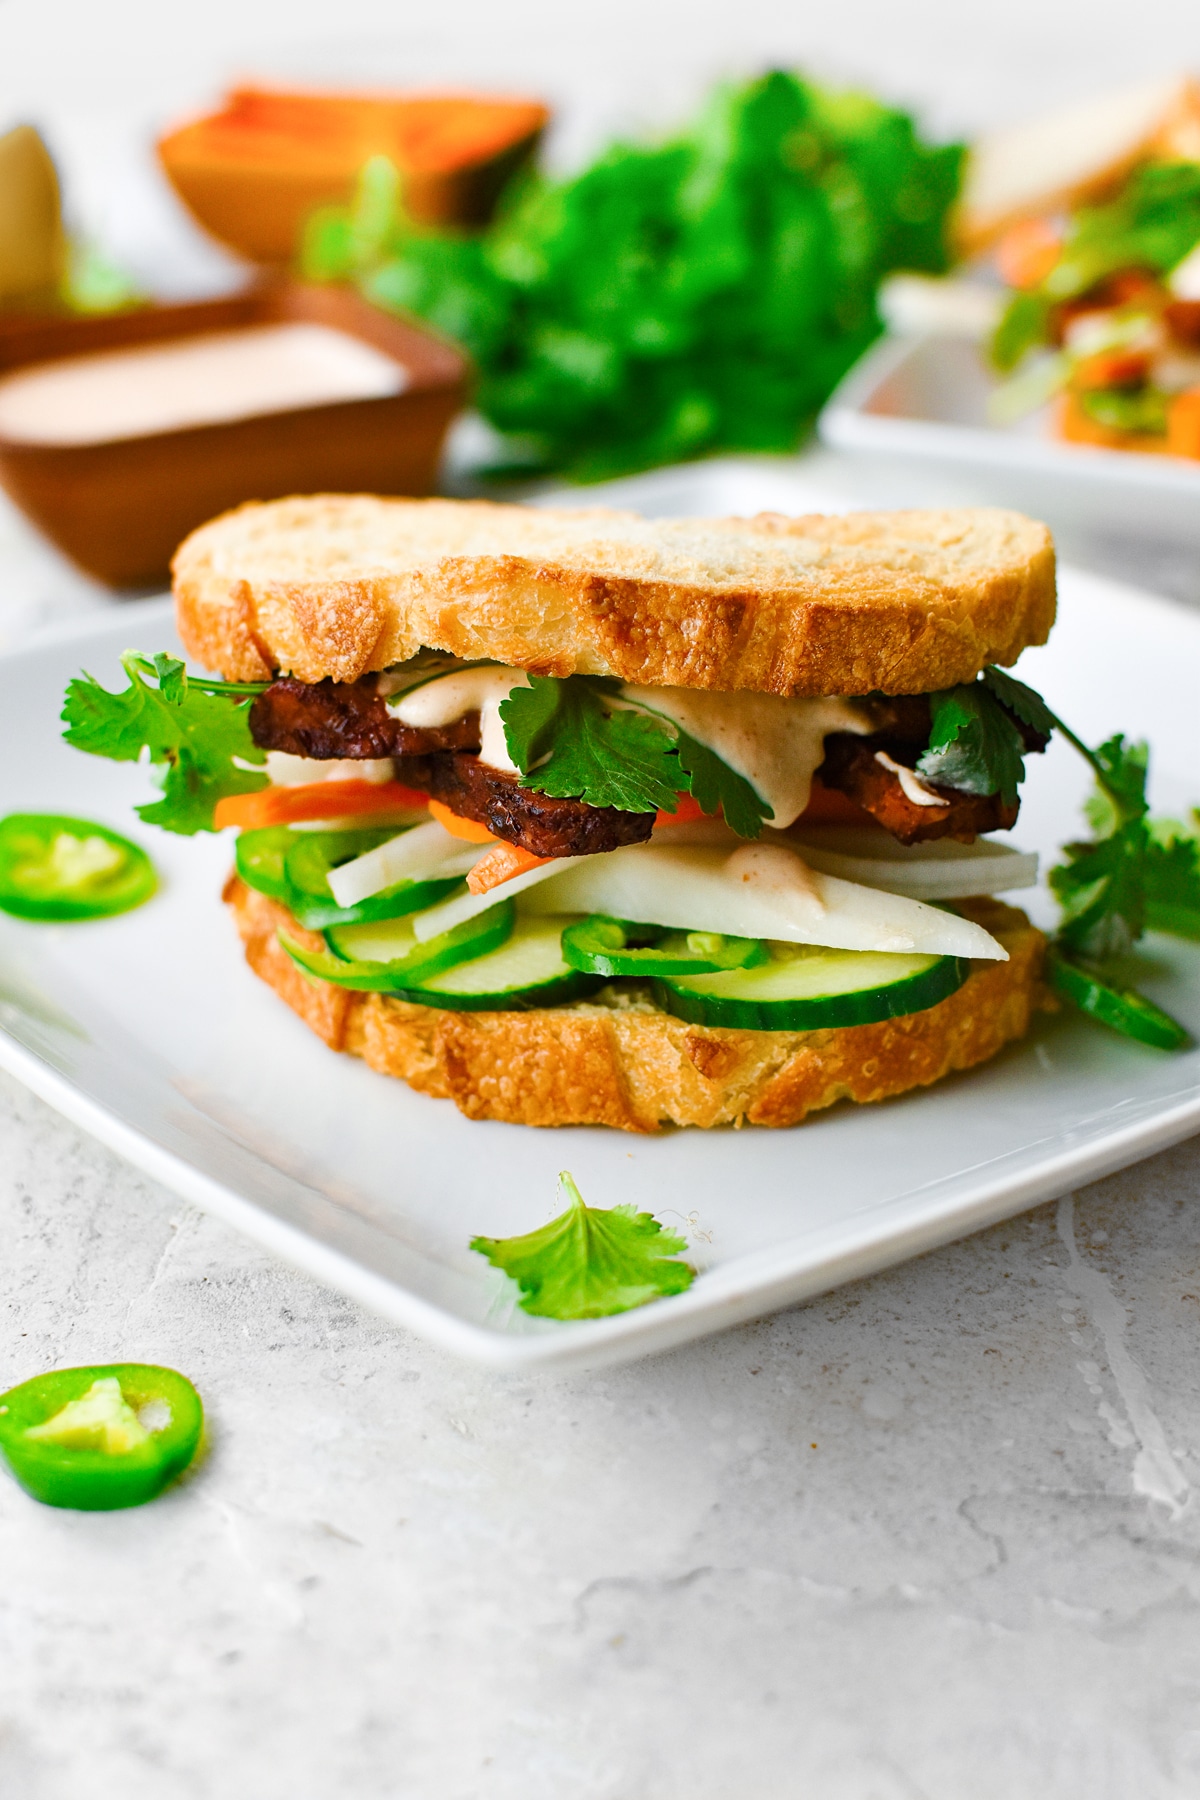 Toasted bread sandwich with tempeh, vegetables, and sauce on a white plate.